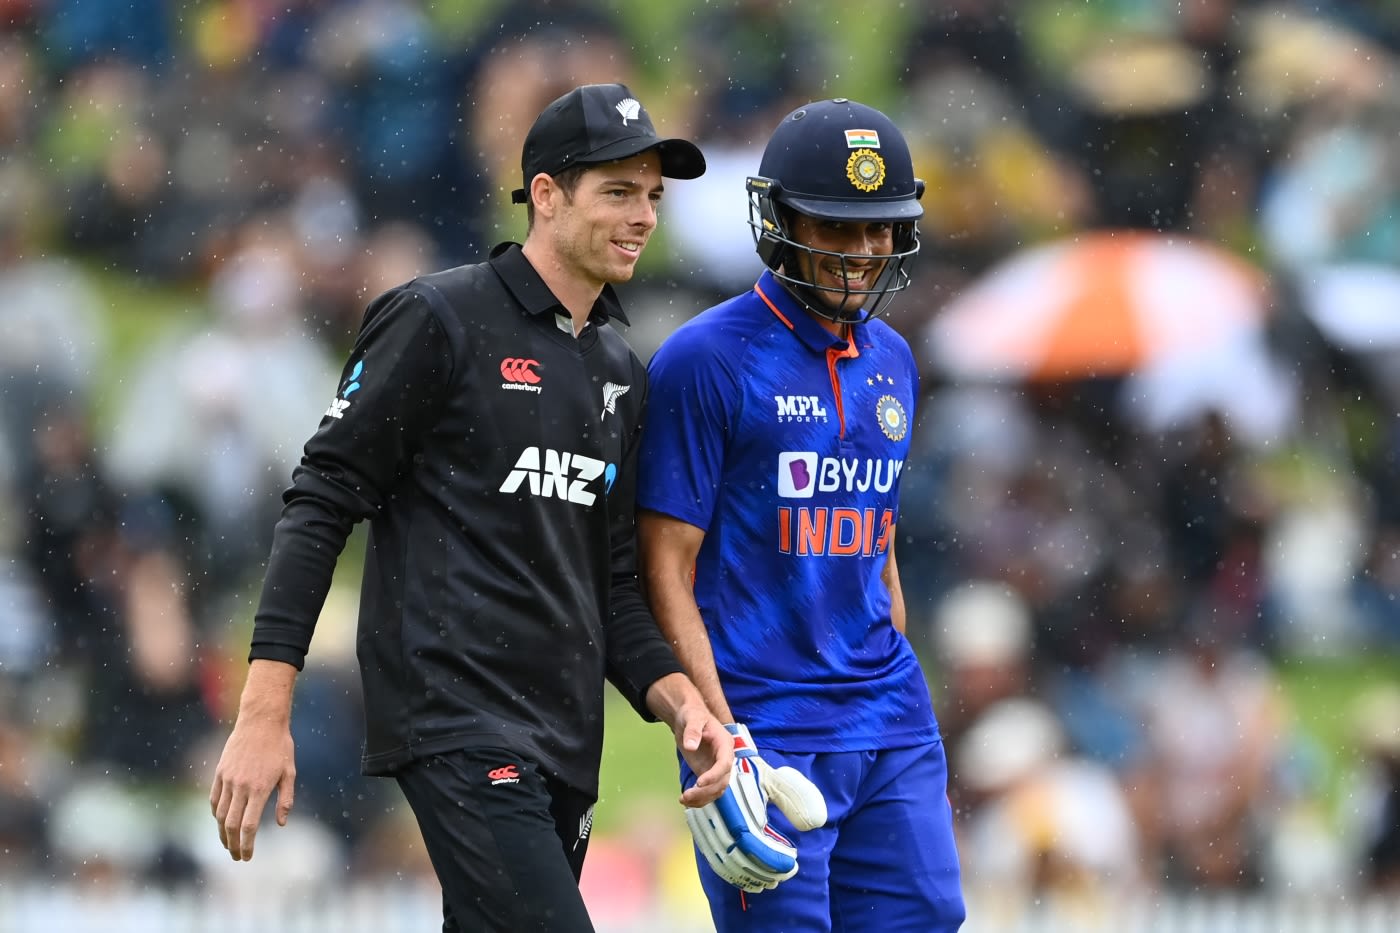 Mitchell Santner and Shubman Gill share a laugh in the drizzle ESPNcricinfo